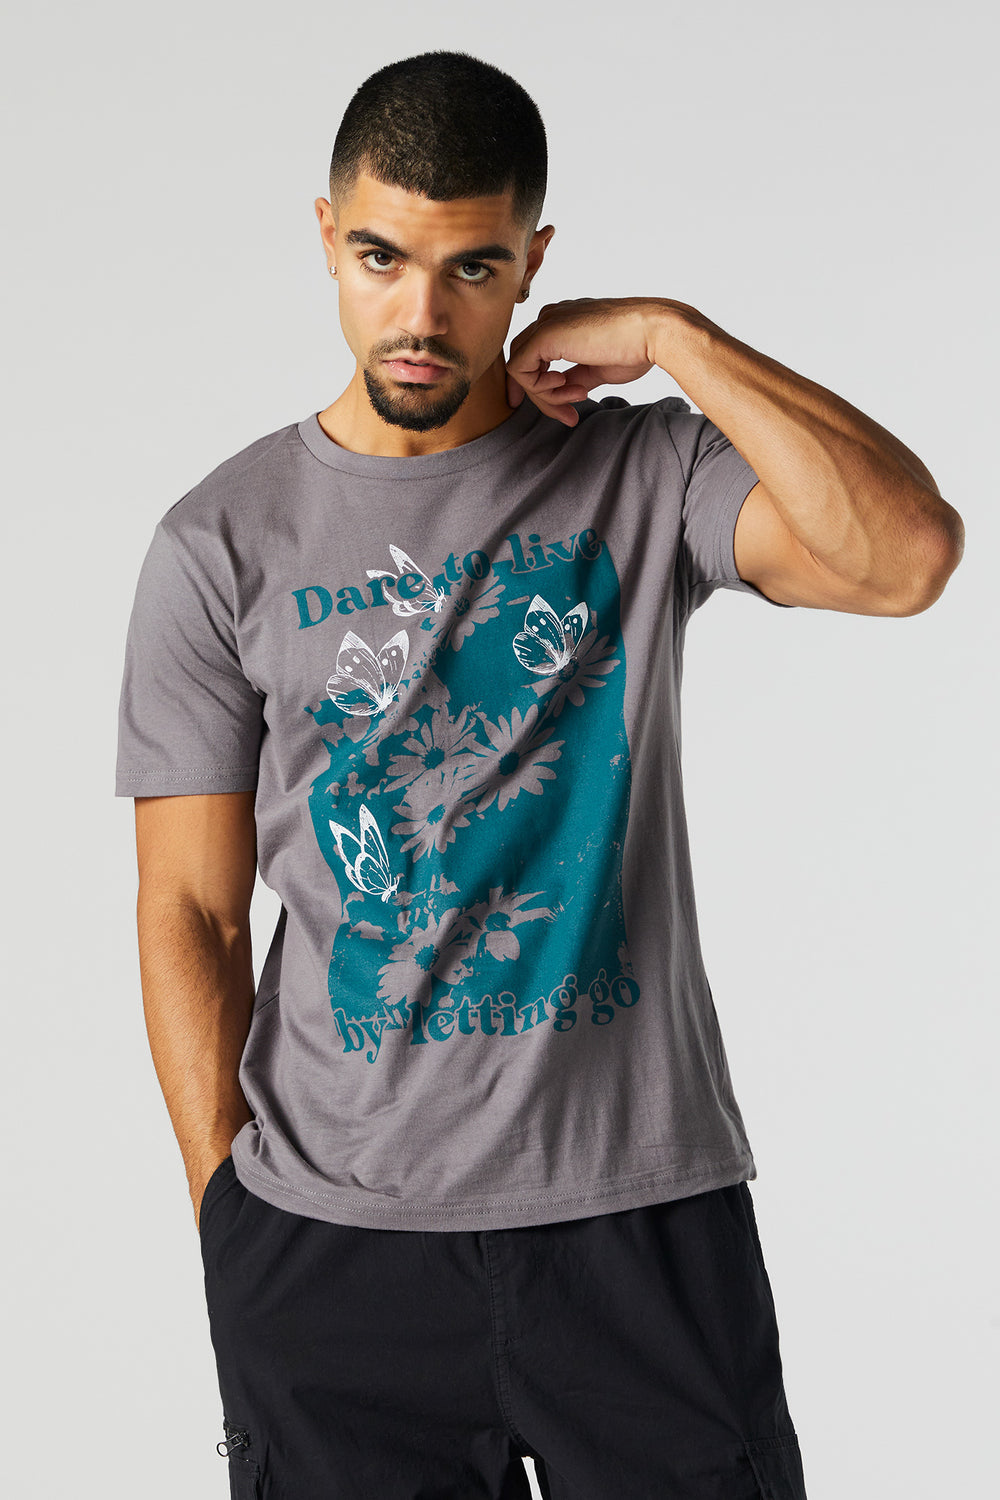 Dare to Live Graphic T-Shirt Dare to Live Graphic T-Shirt 2